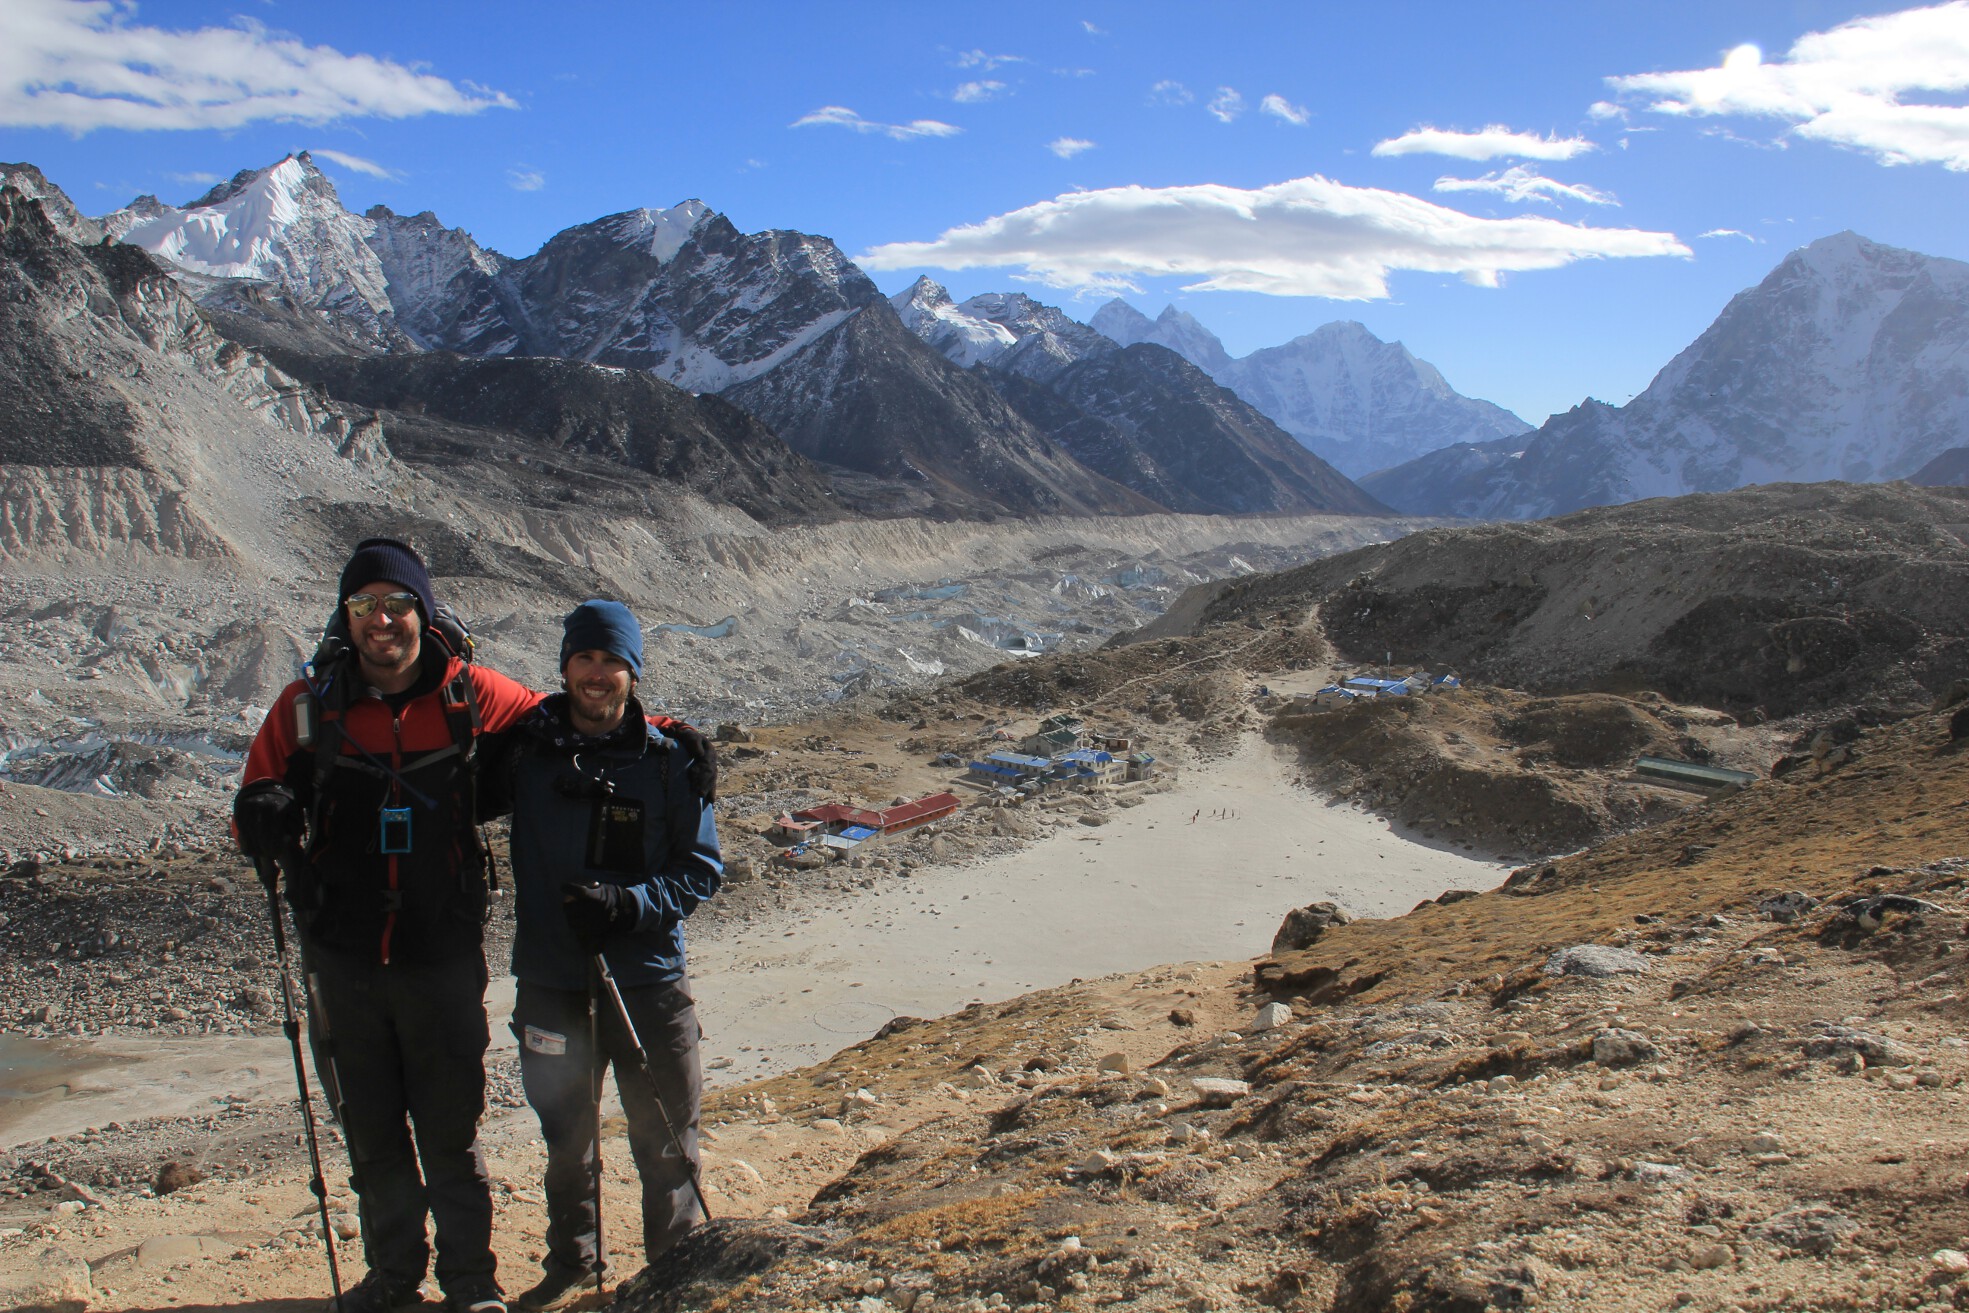 Hank and Brian pause for filming and a photo on the way up Kala Patthar.